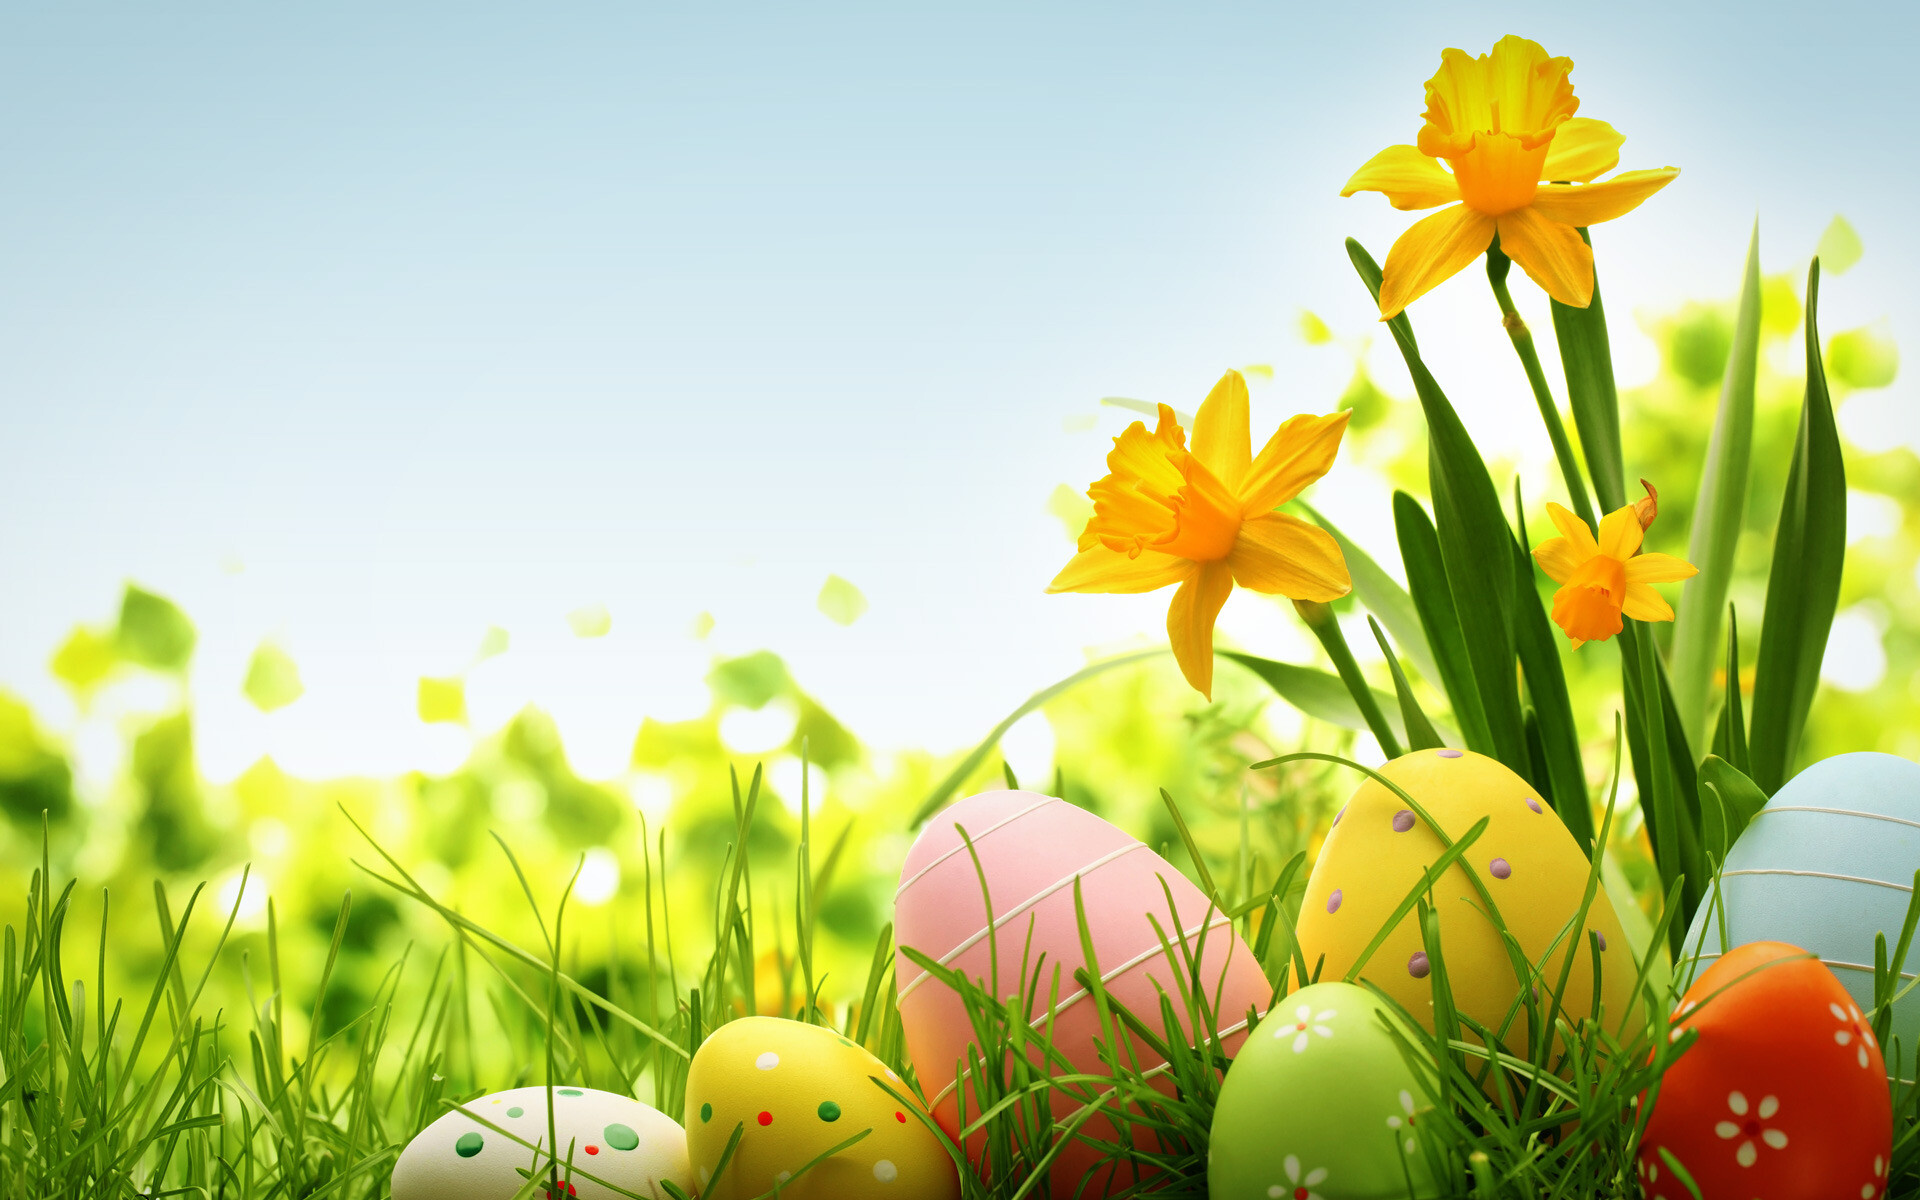 Easter: Decorating eggs was traditionally a symbol of the empty tomb. 1920x1200 HD Wallpaper.